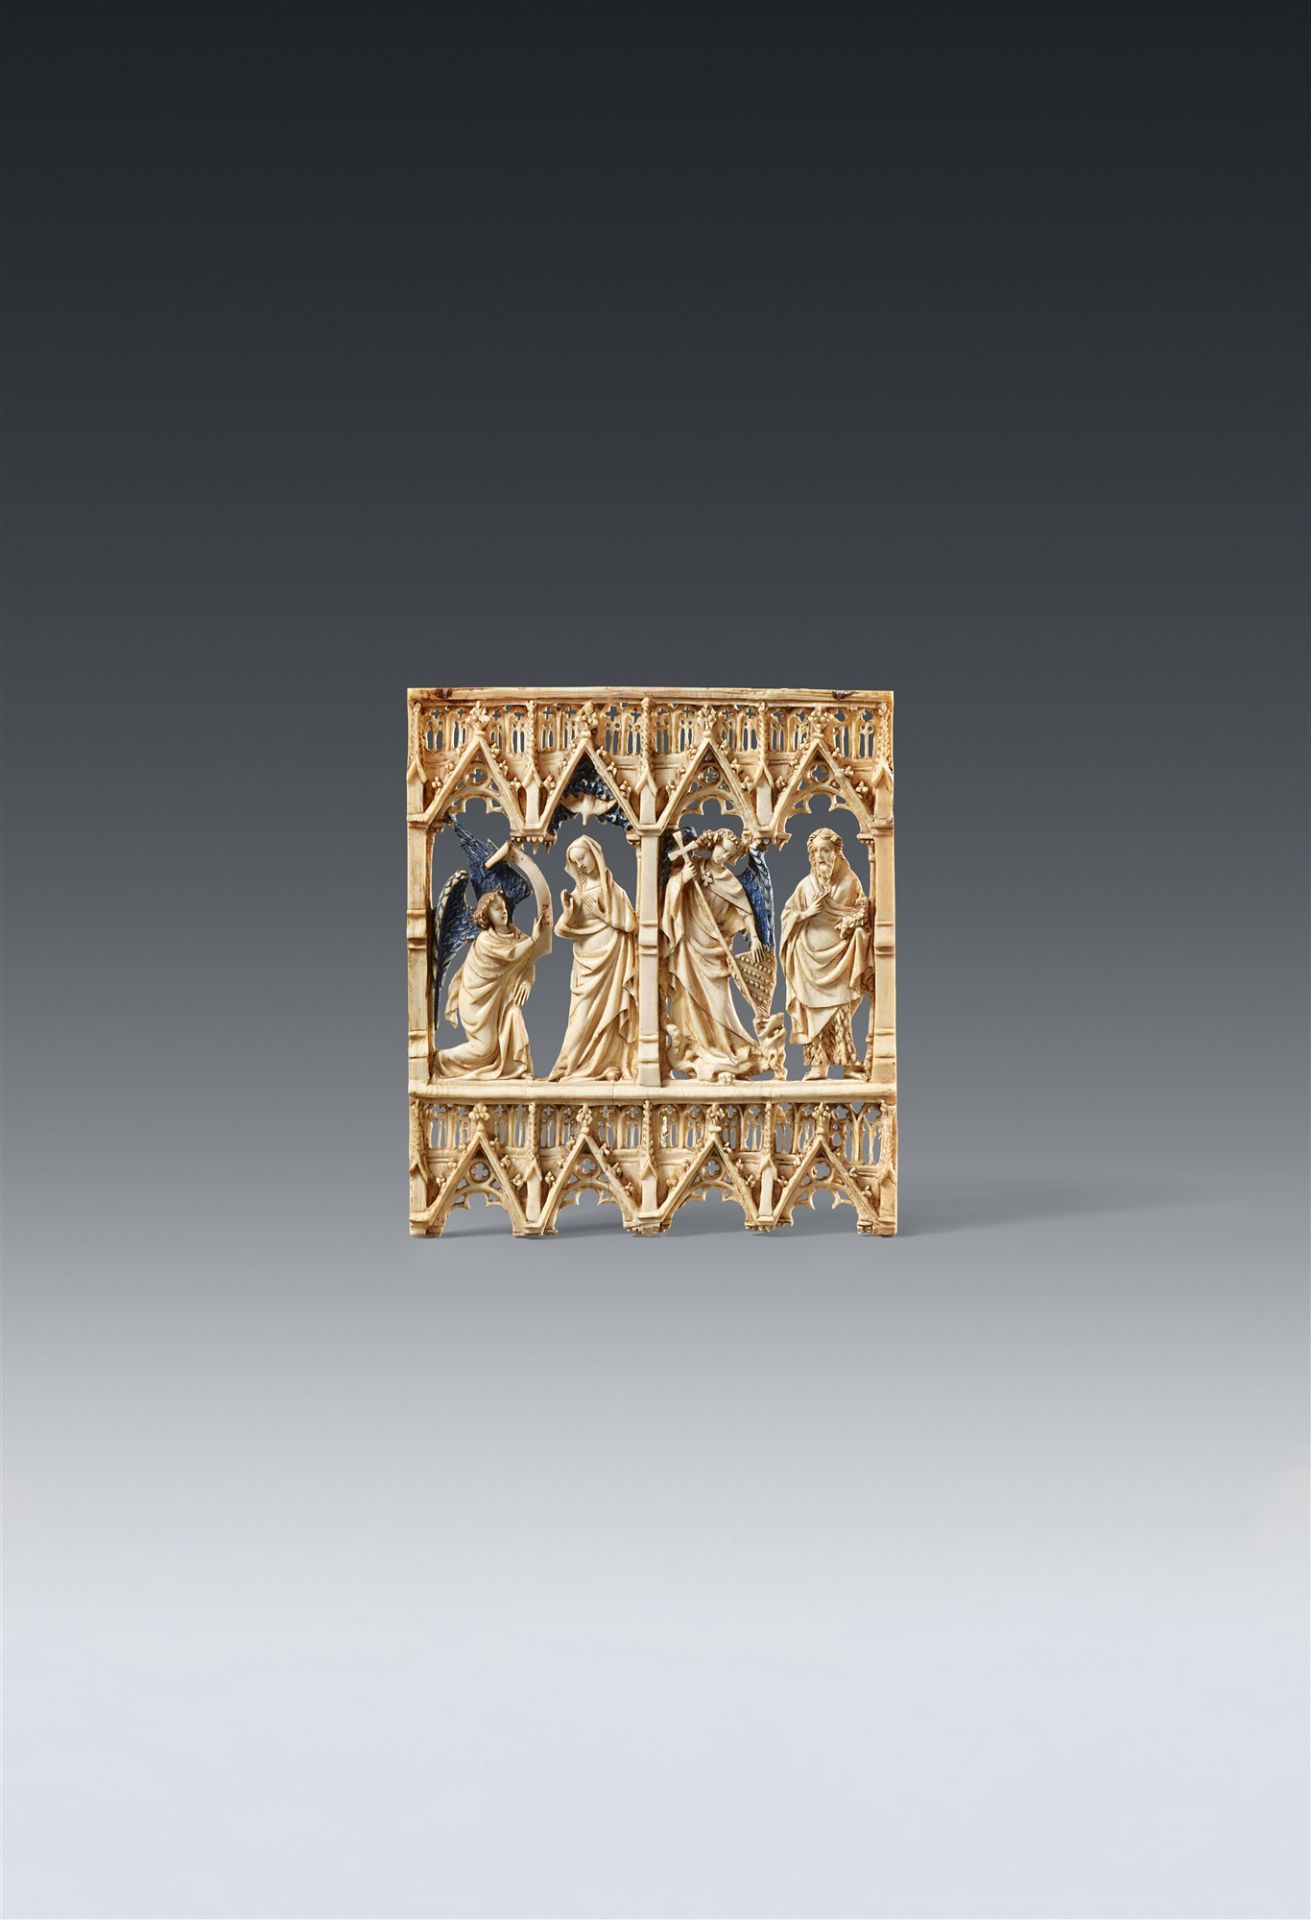 A 14th century Parisian carved ivory relief